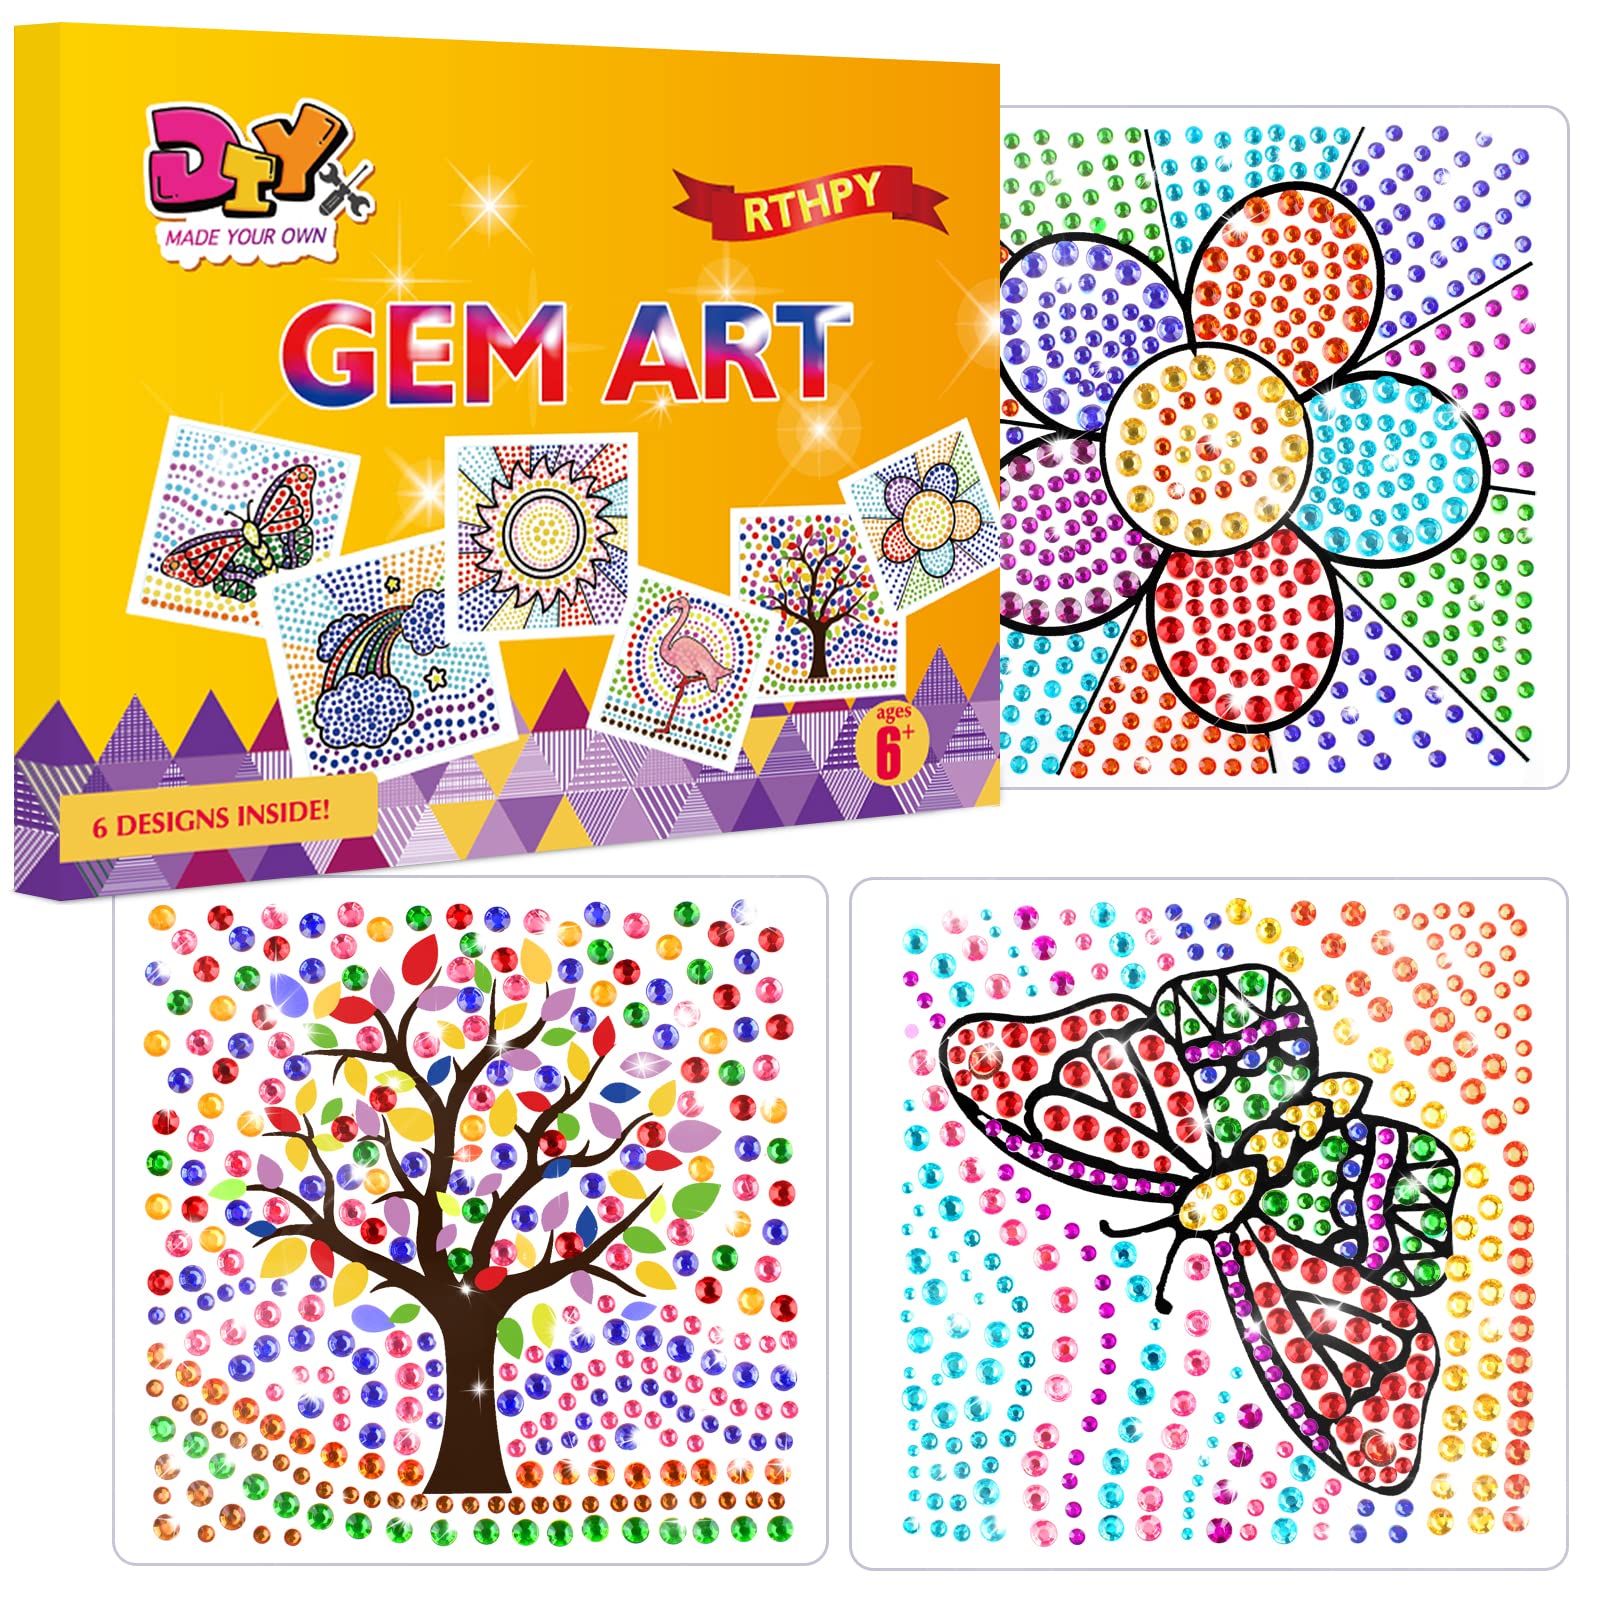 Arts and Crafts for Kids Ages 8-12 - Diamond Painting Kits for Kids -  Diamond Art for Kids, Diamond Dot Gem Art Kits for Kids, Make Your Own GEM